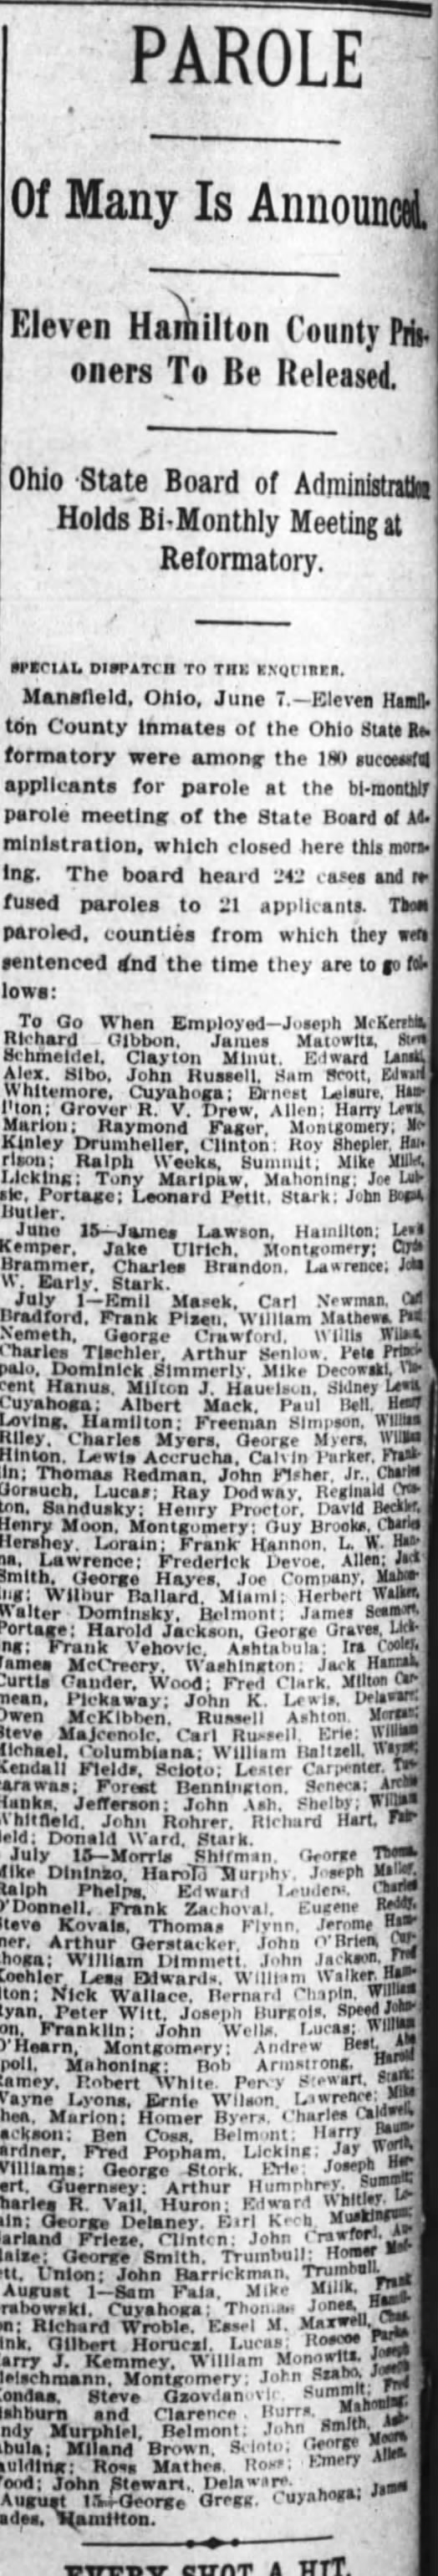 Listing of Parole, Donald Ward mentioned. 8 June 1916